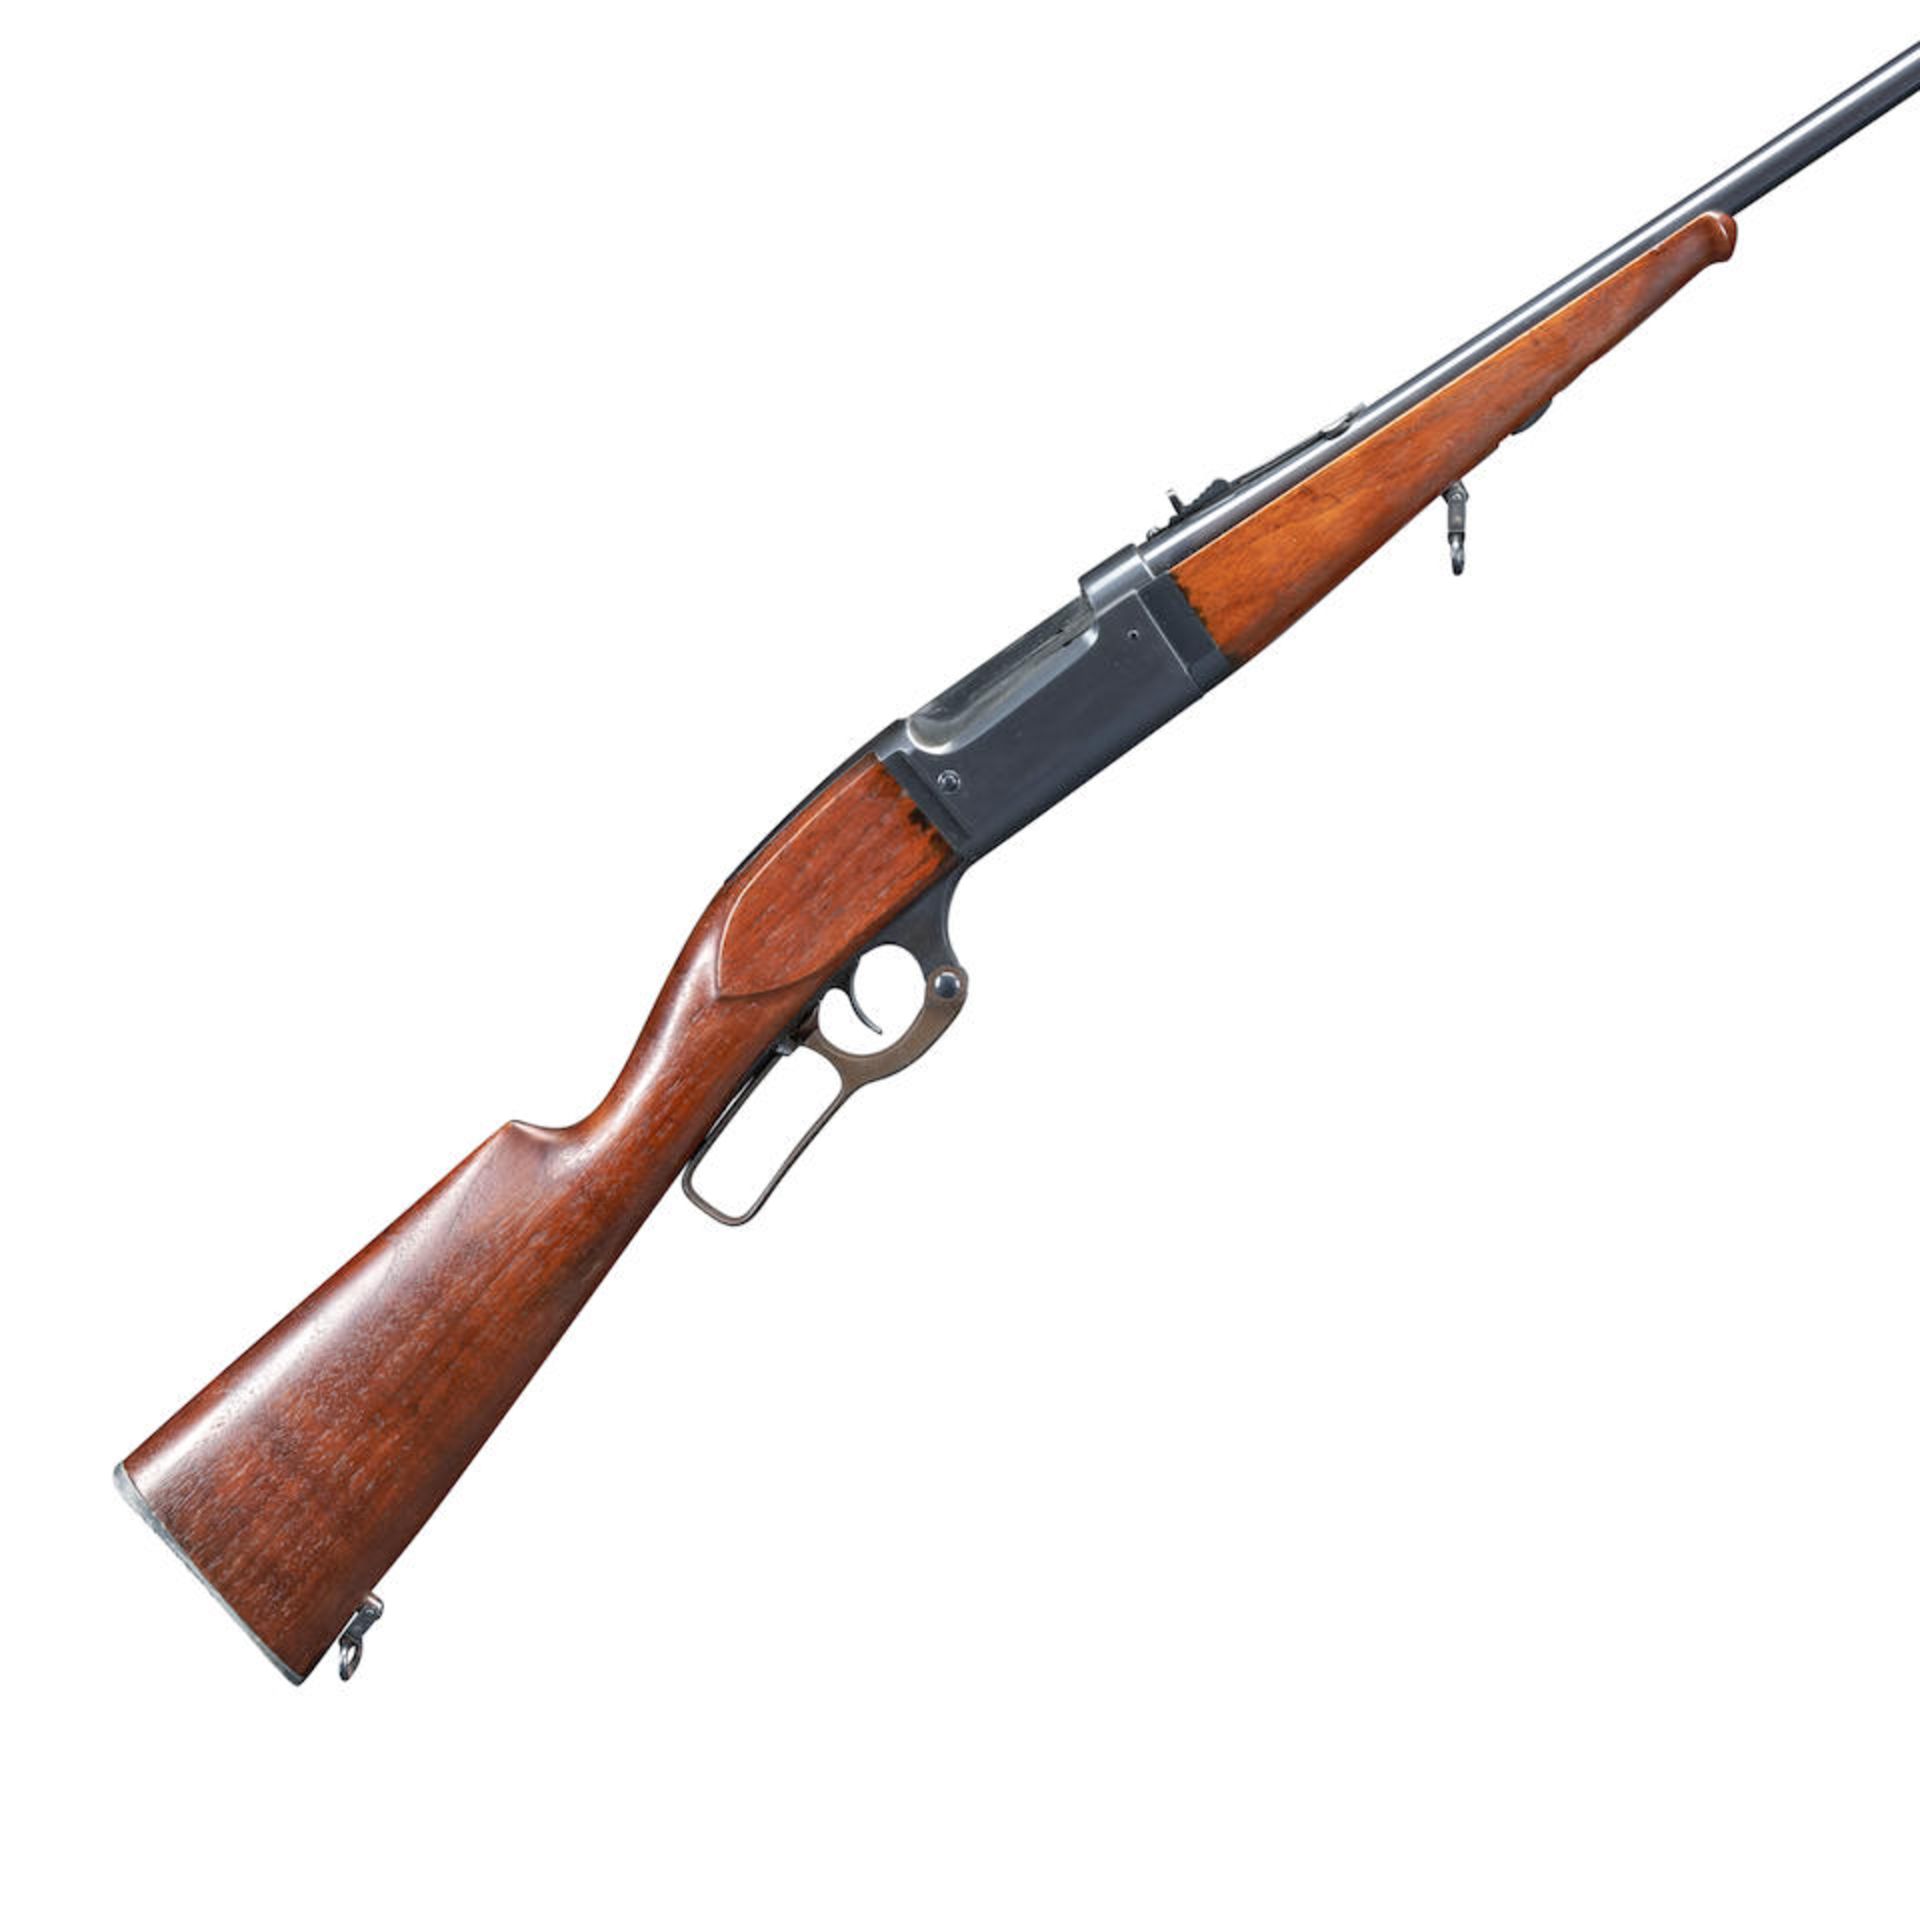 Savage Model 1899 Lever-action Rifle, Curio or Relic firearm